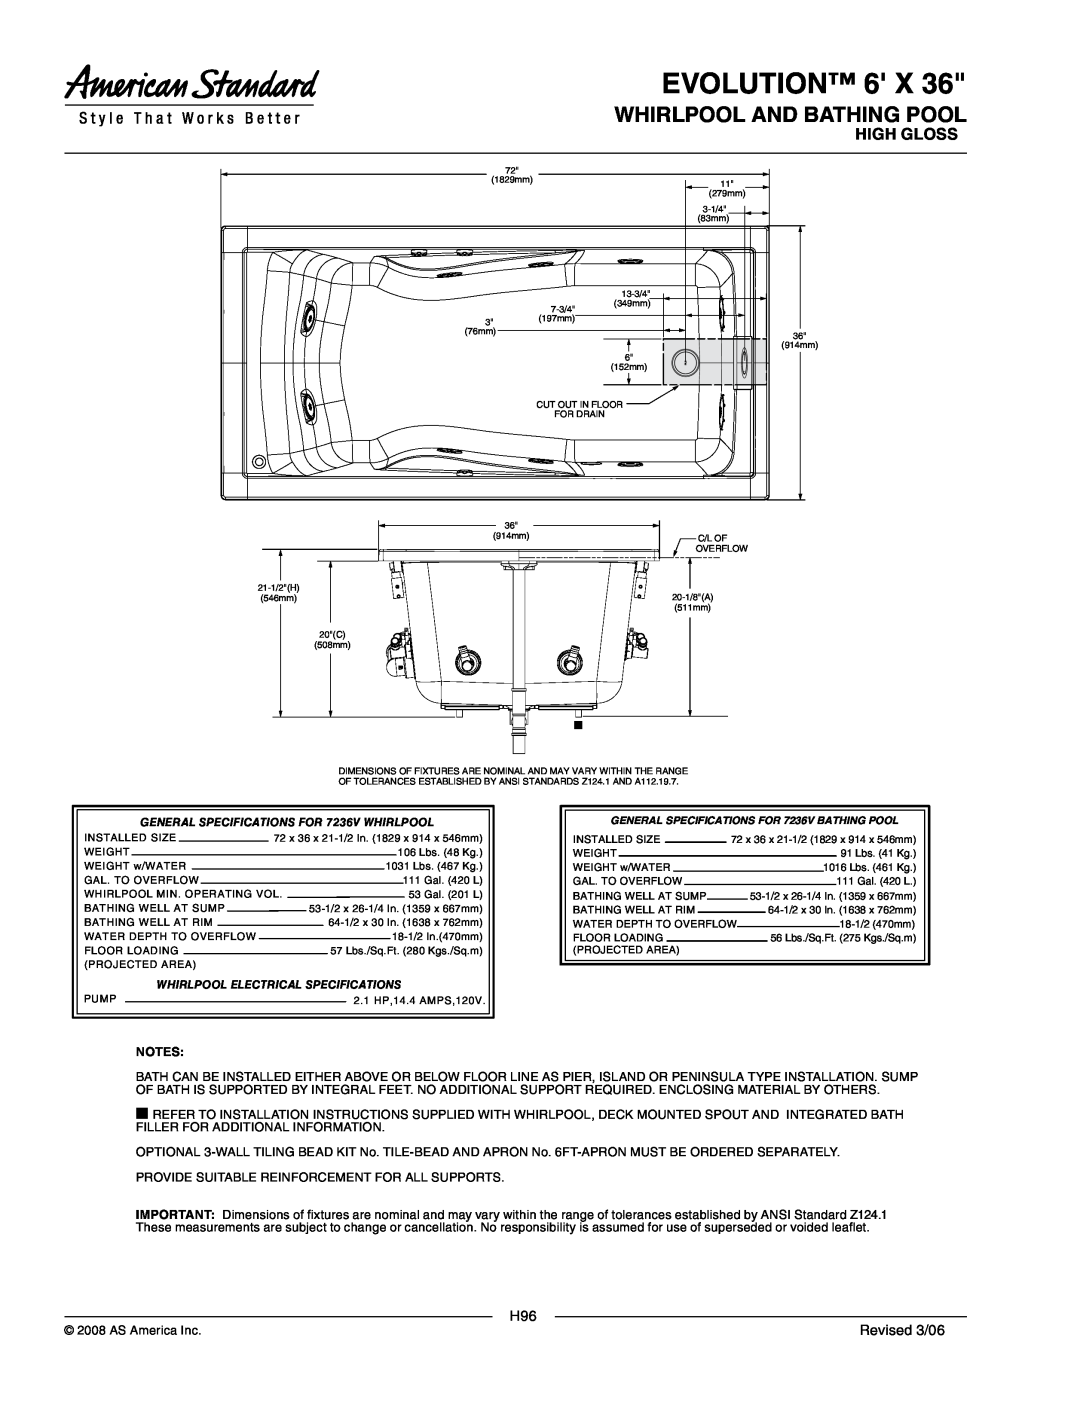 American Standard 7236VC, 7236V.002 dimensions Evolution, Whirlpool And Bathing Pool, High Gloss, Revised 3/06 